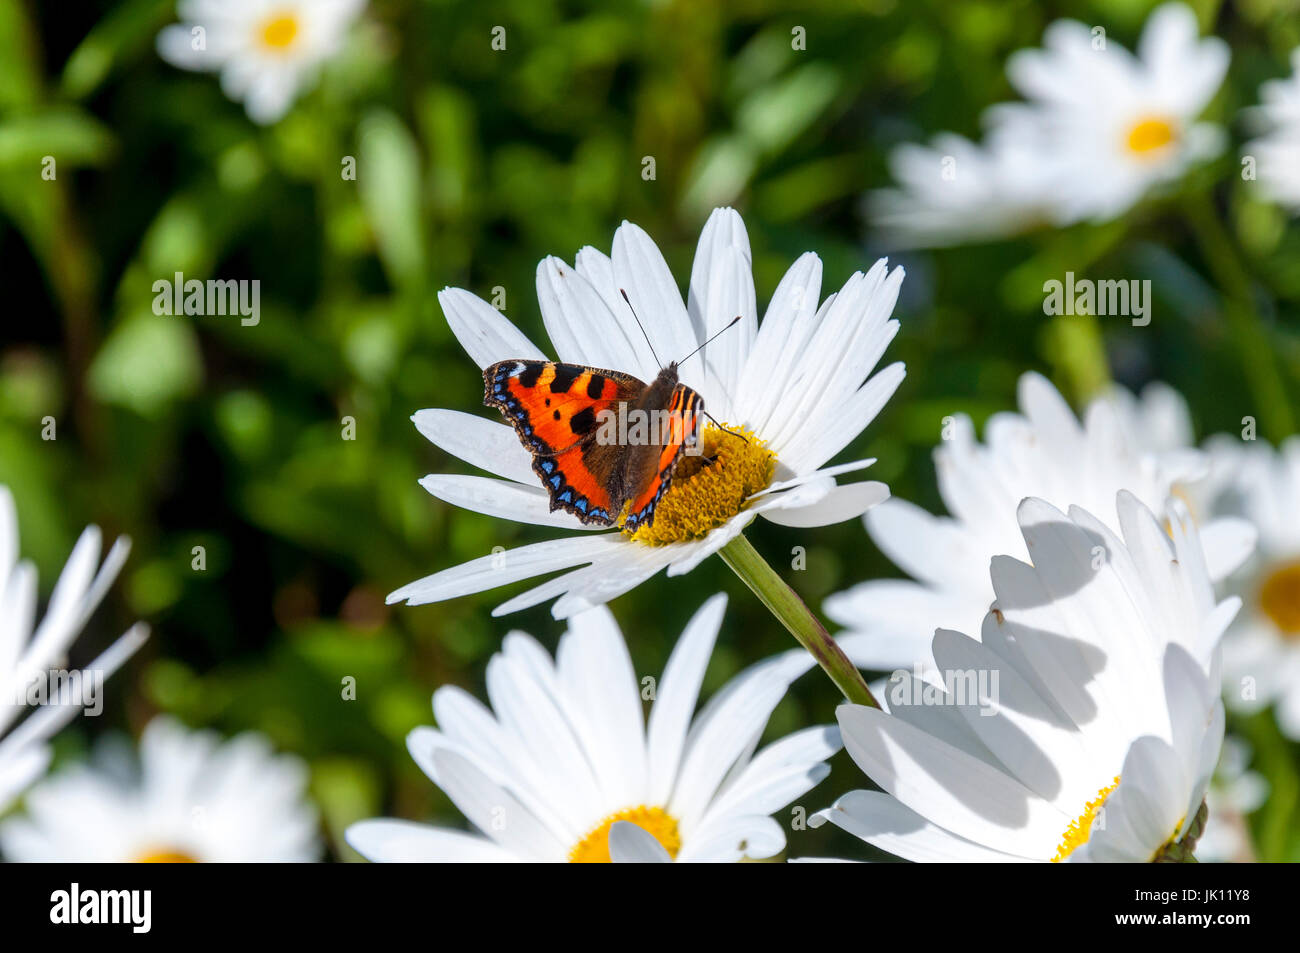 A small tortoiseshell butterfly, family Nymphalidae, Scientific name Aglais urticae alights on a ginat daisy flower Stock Photo